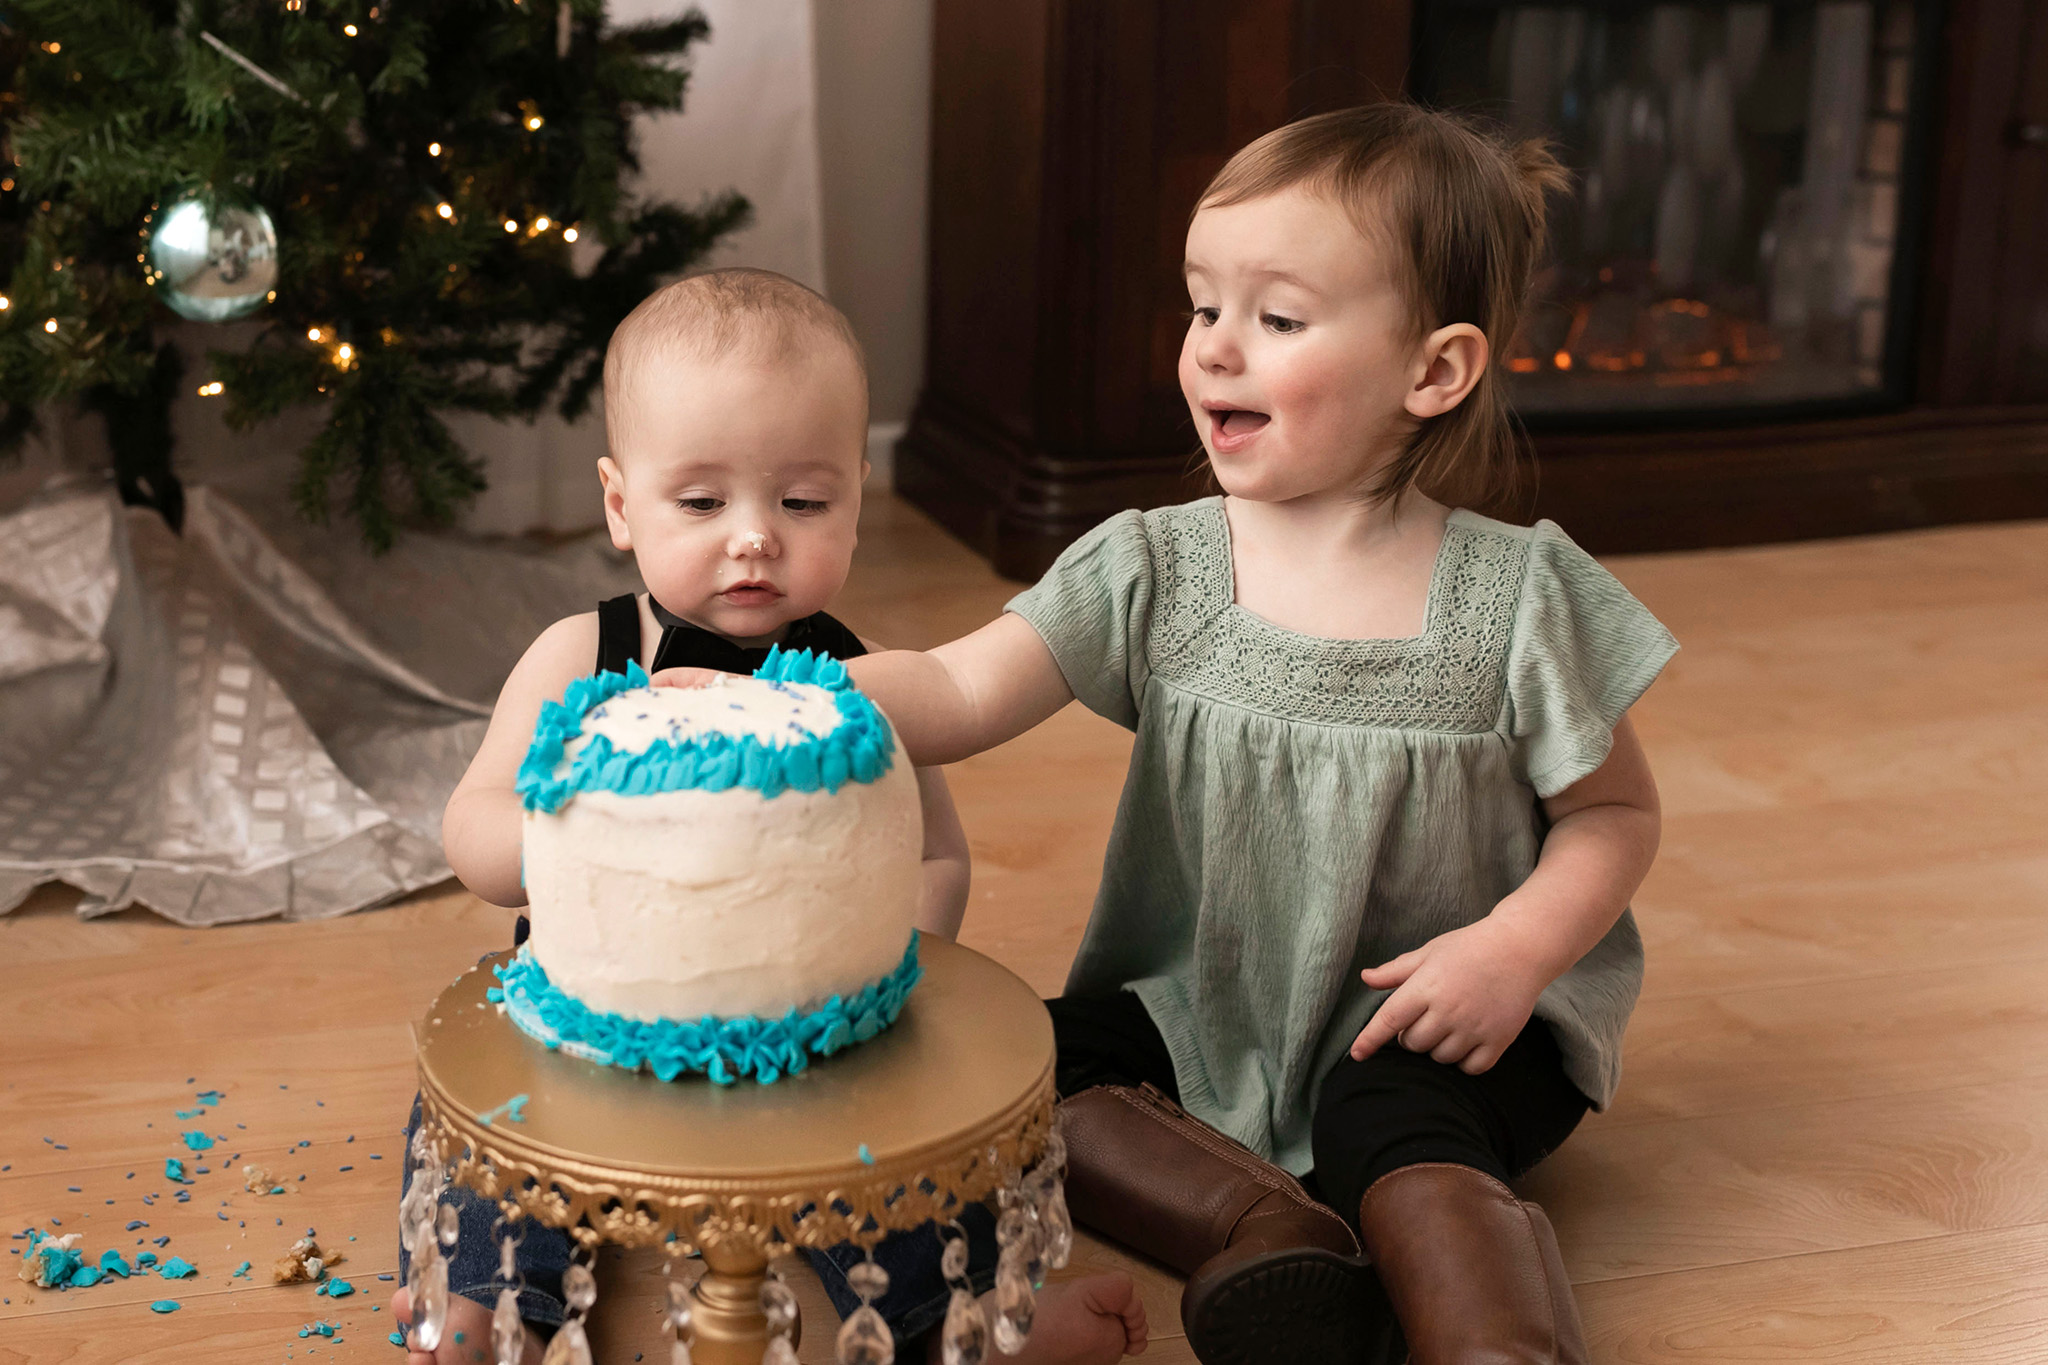 Big Sister tries to help her little brother with his cake